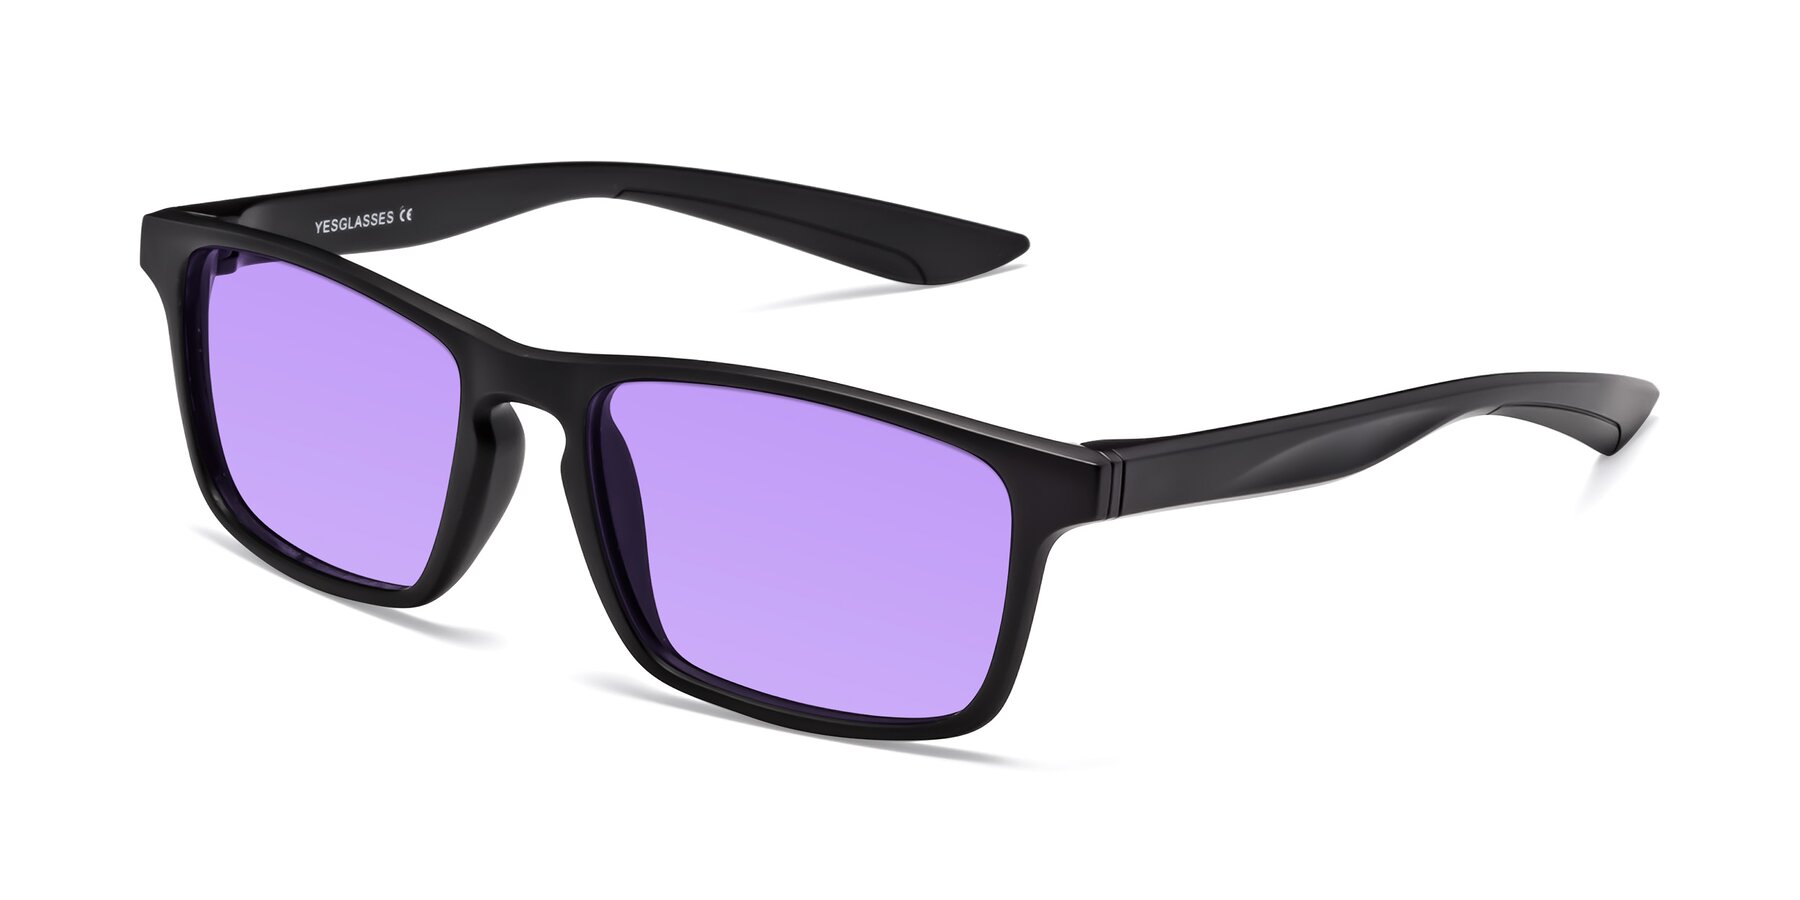 Angle of Passion in Matte Black with Medium Purple Tinted Lenses